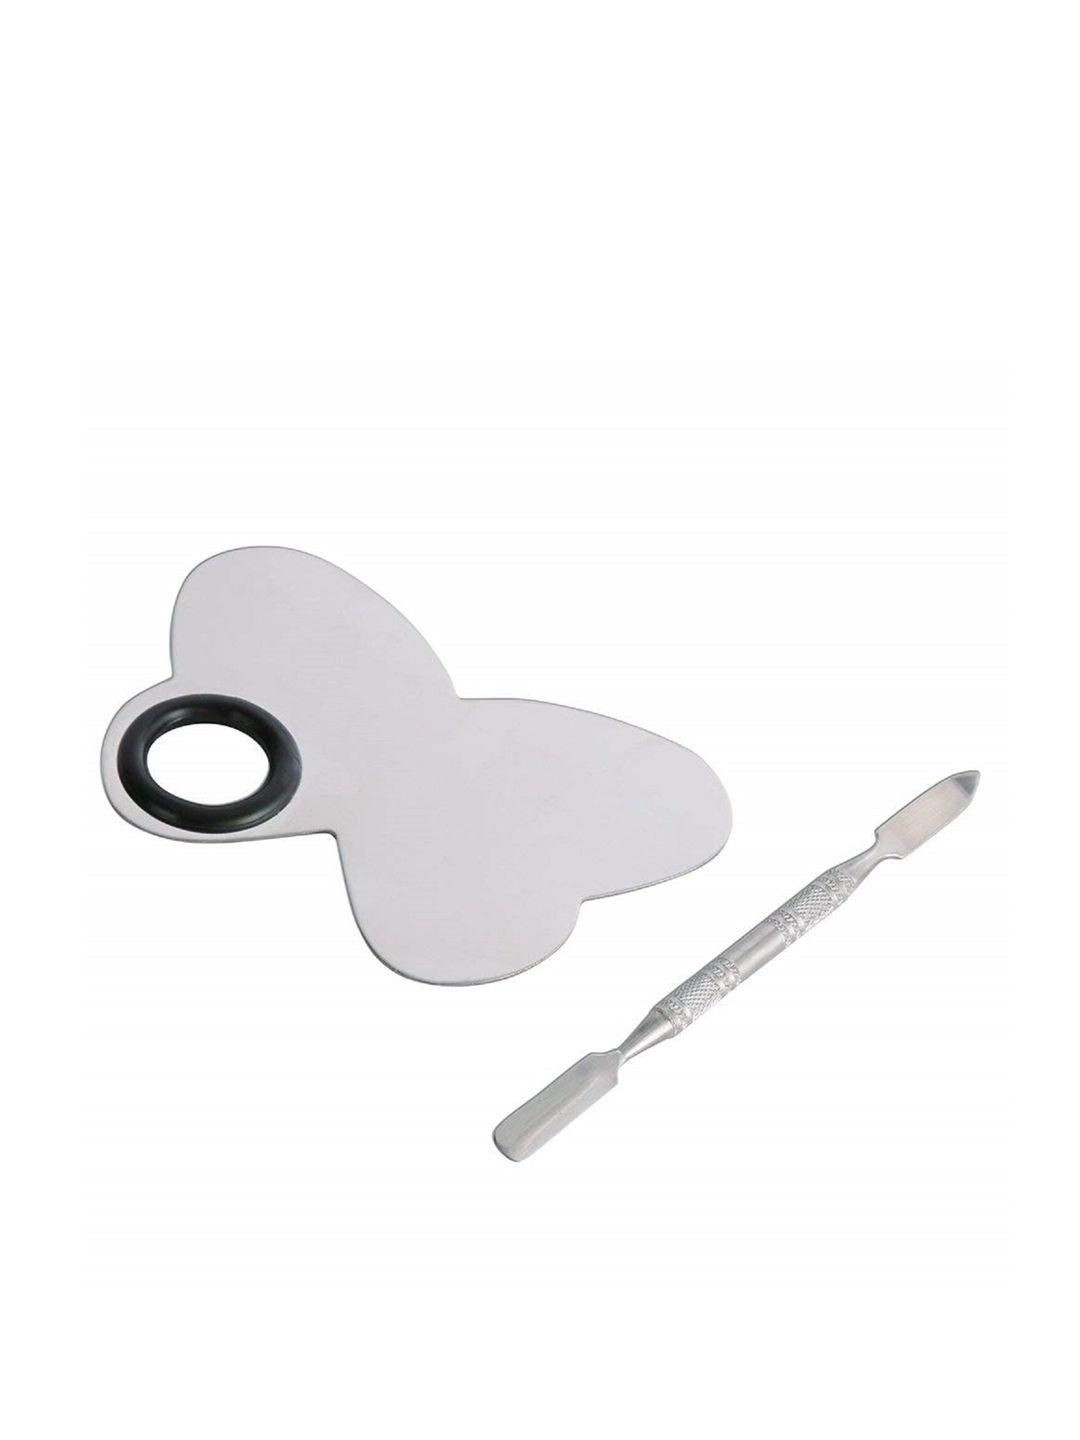 beaute-secrets-butterfly-shaped-makeup-blending-palette-with-spatula---silver-toned